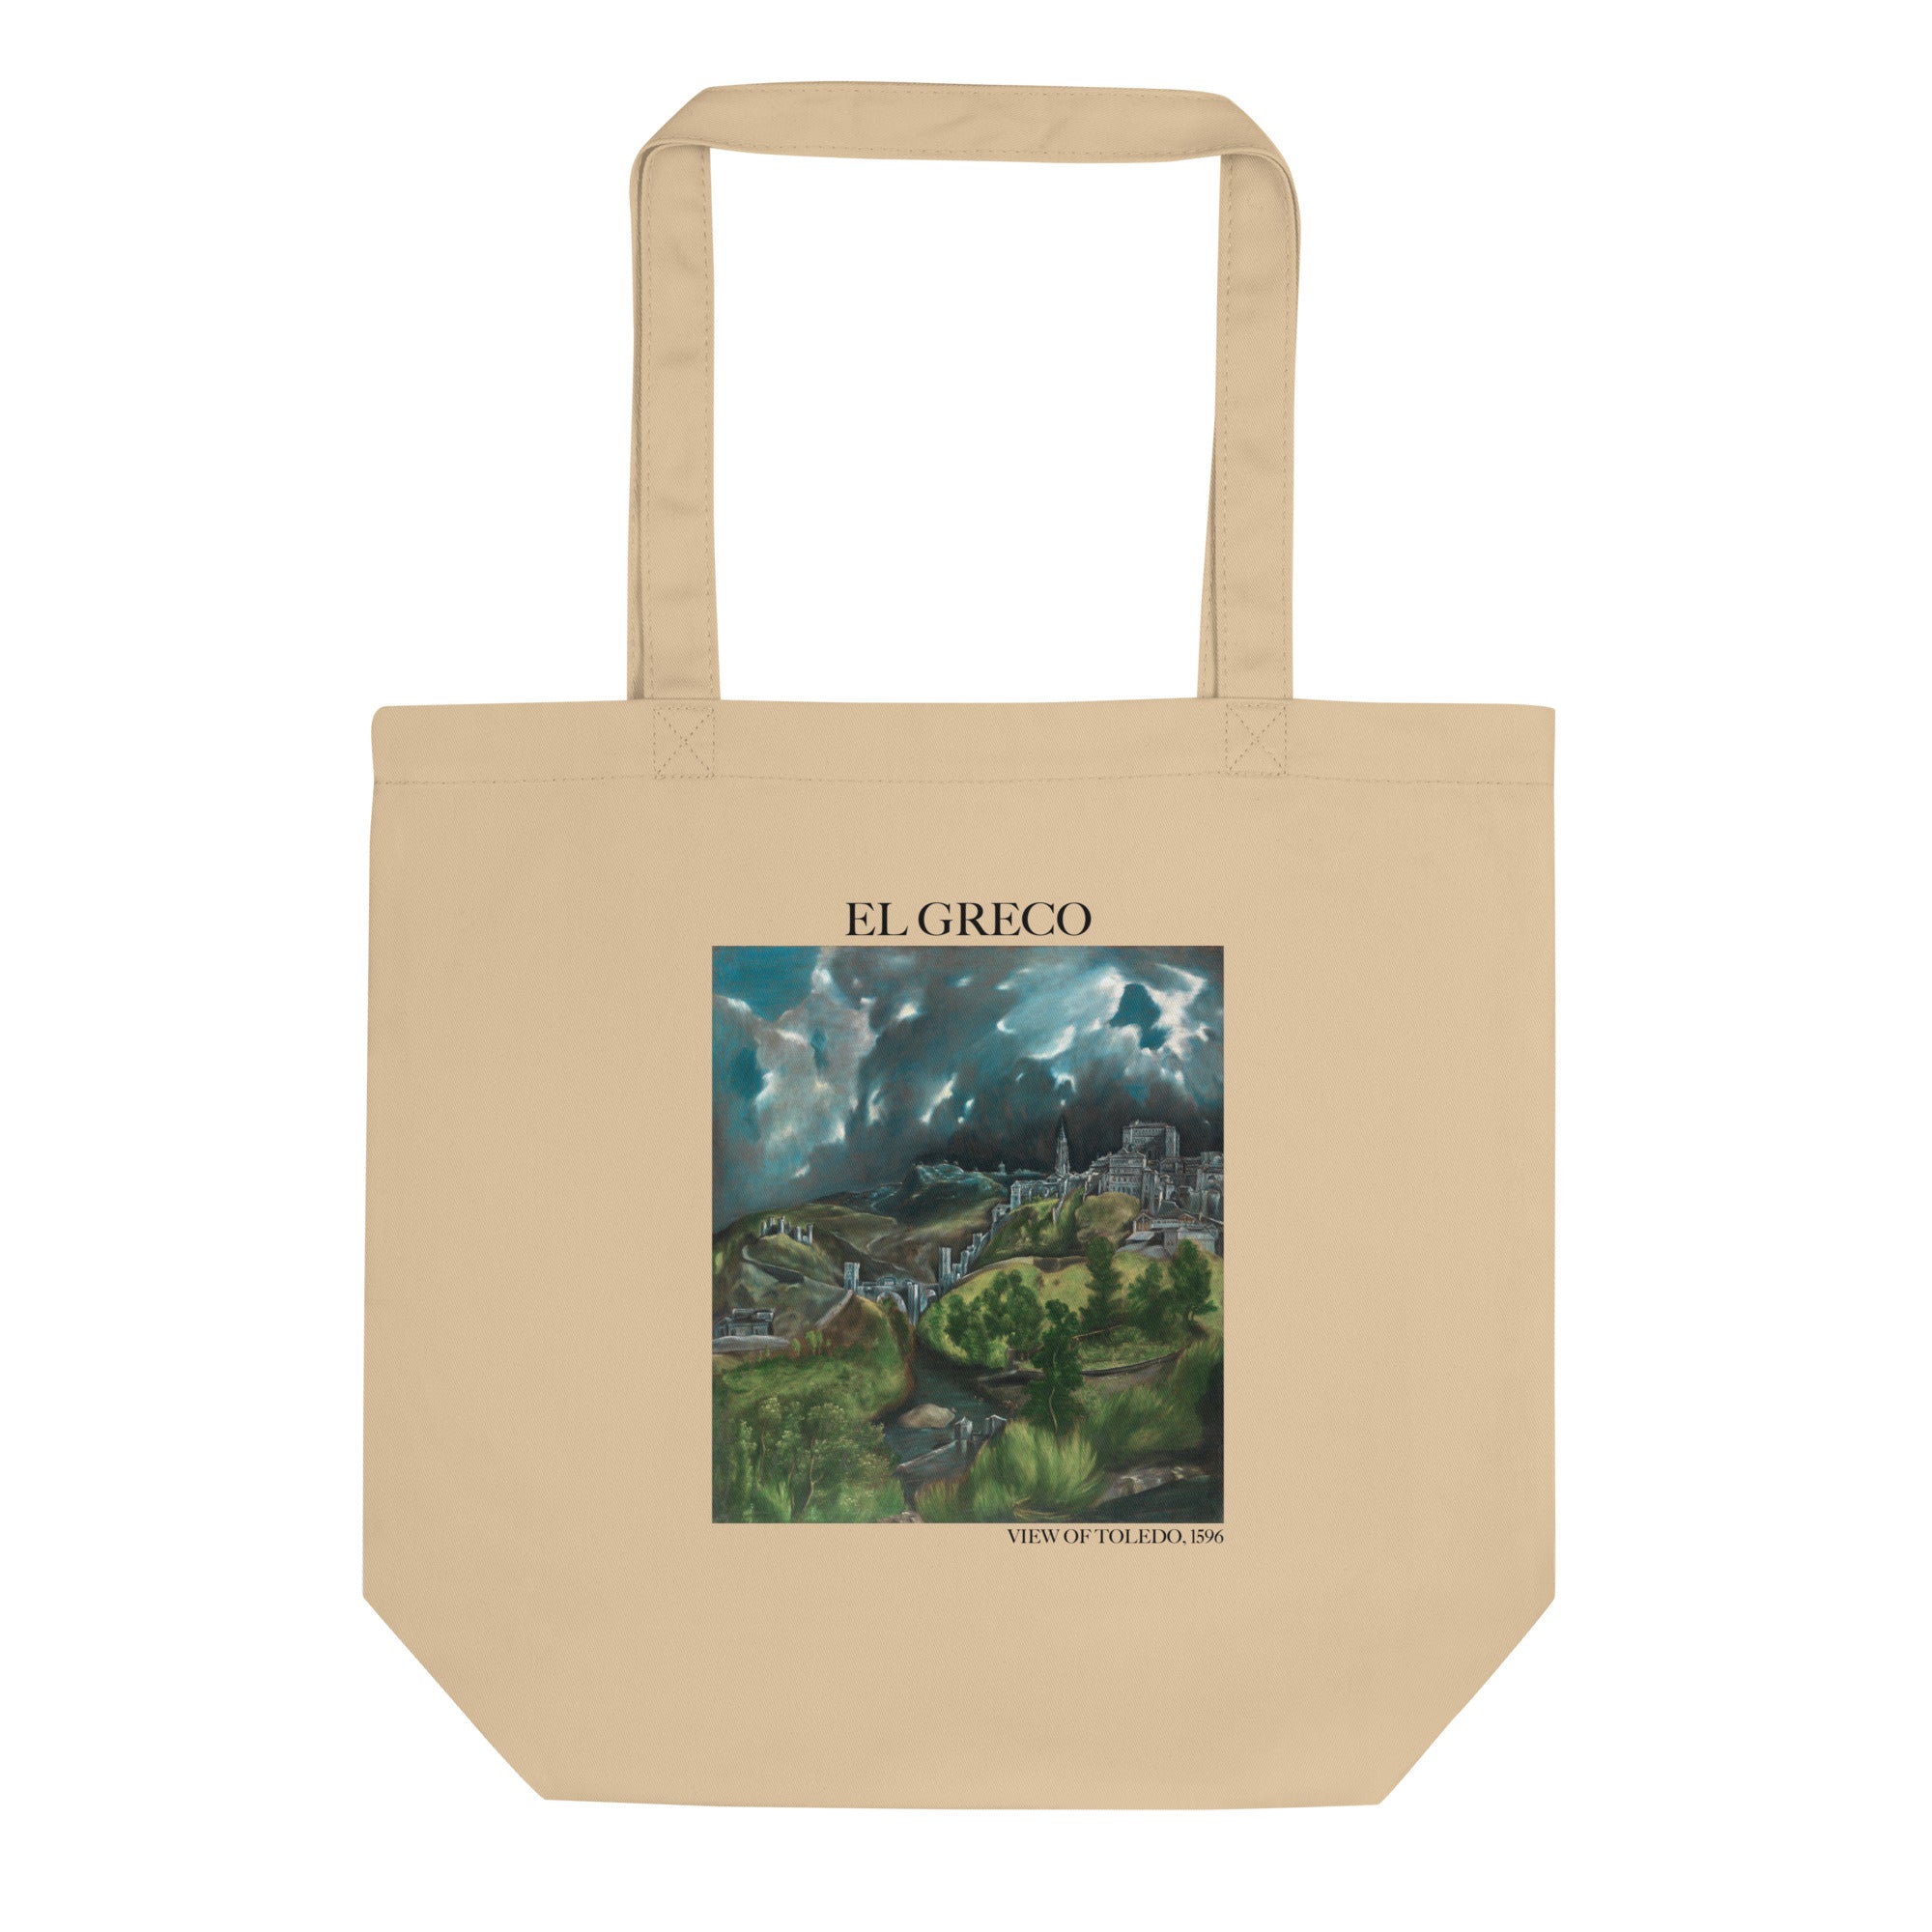 El Greco 'View of Toledo' Famous Painting Totebag | Eco Friendly Art Tote Bag